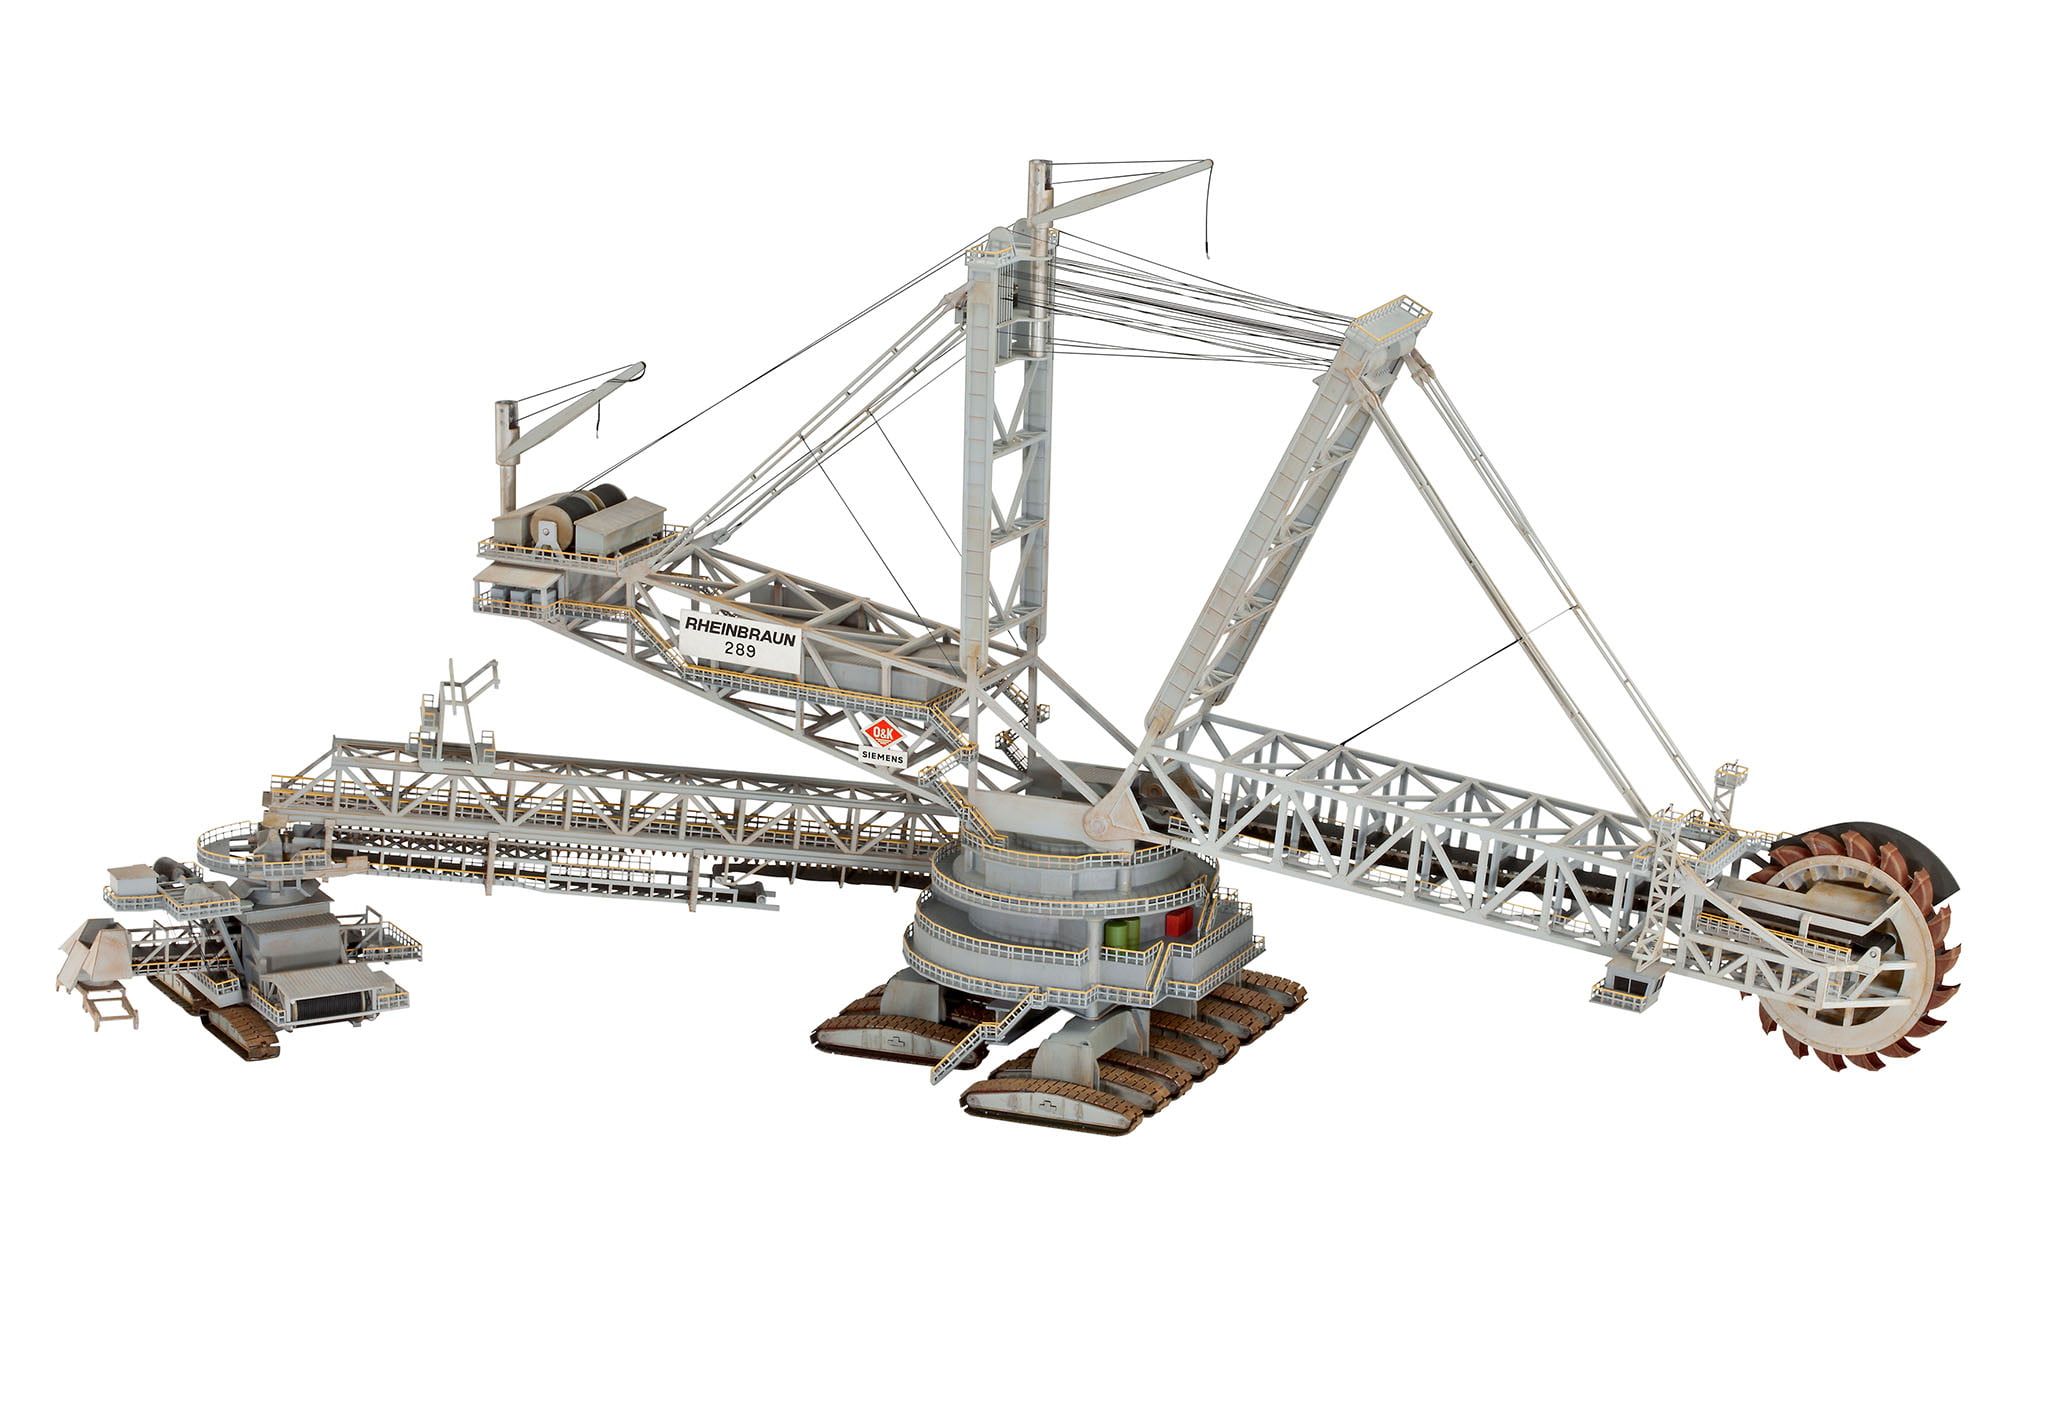  Revell Bucket Wheel Excavator 289 Limited Edition 1:200 Scale